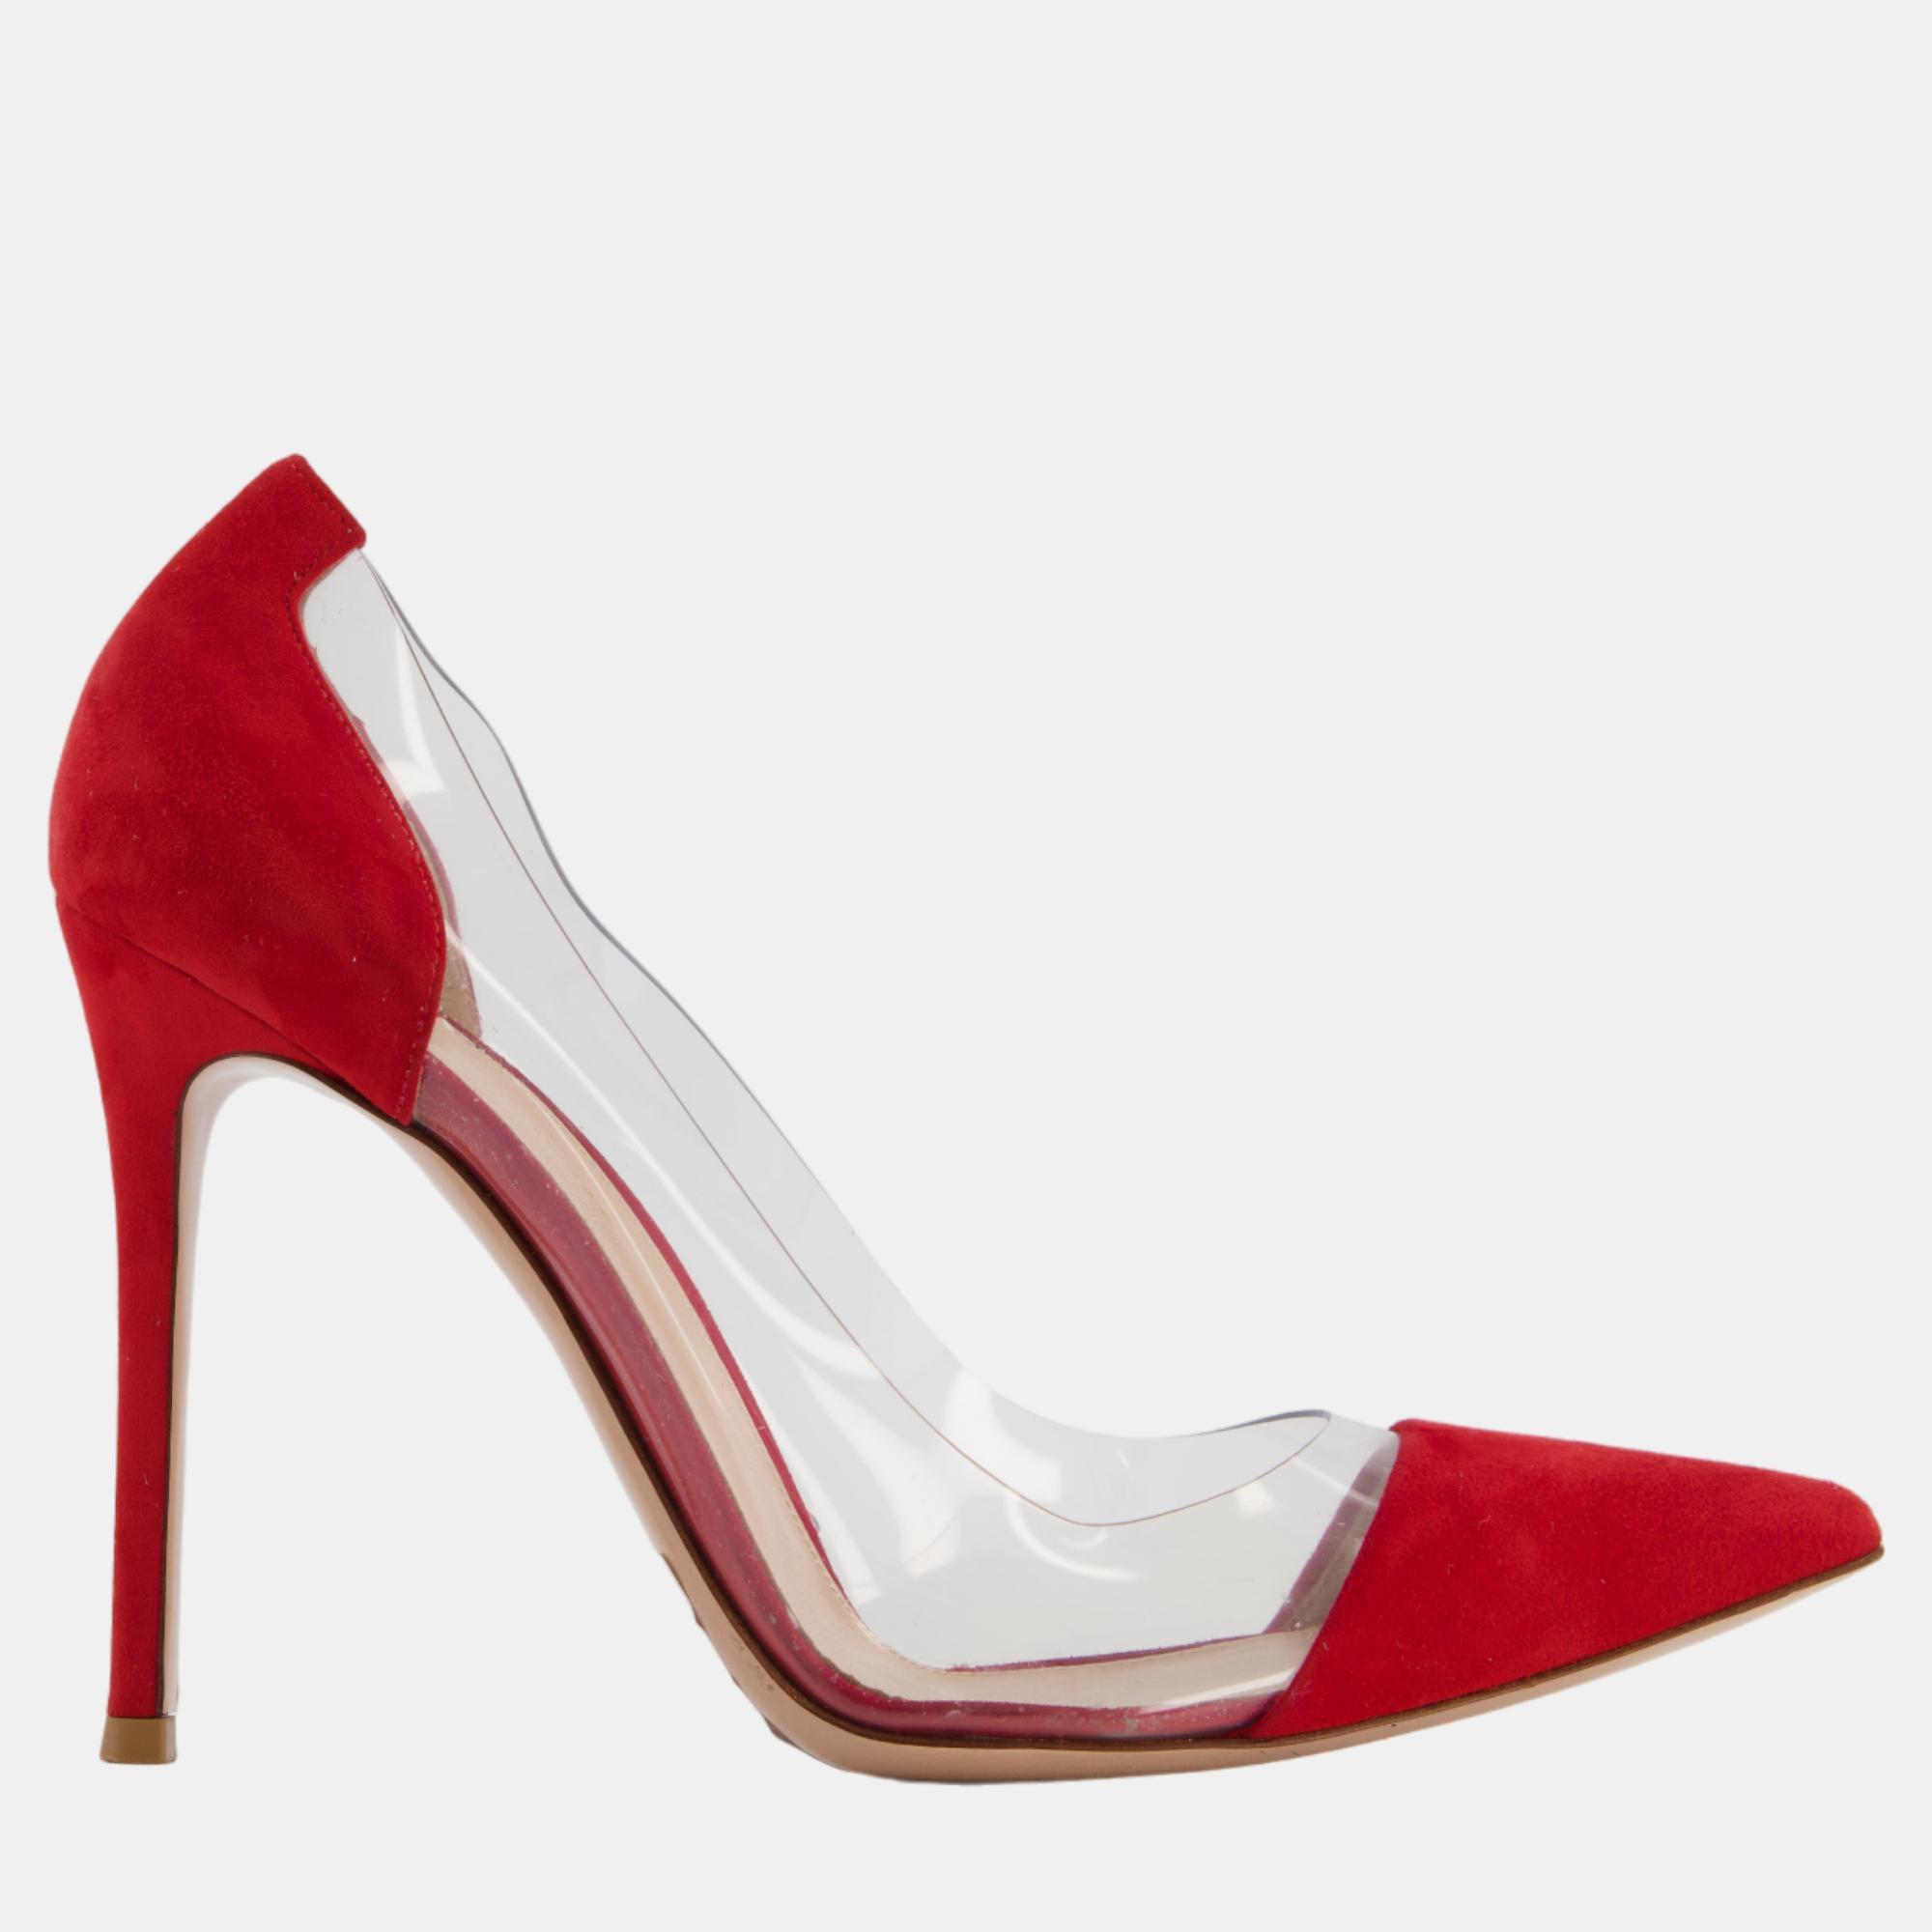 gianvito rossi red suede and pvc pointed high heel size eu 40